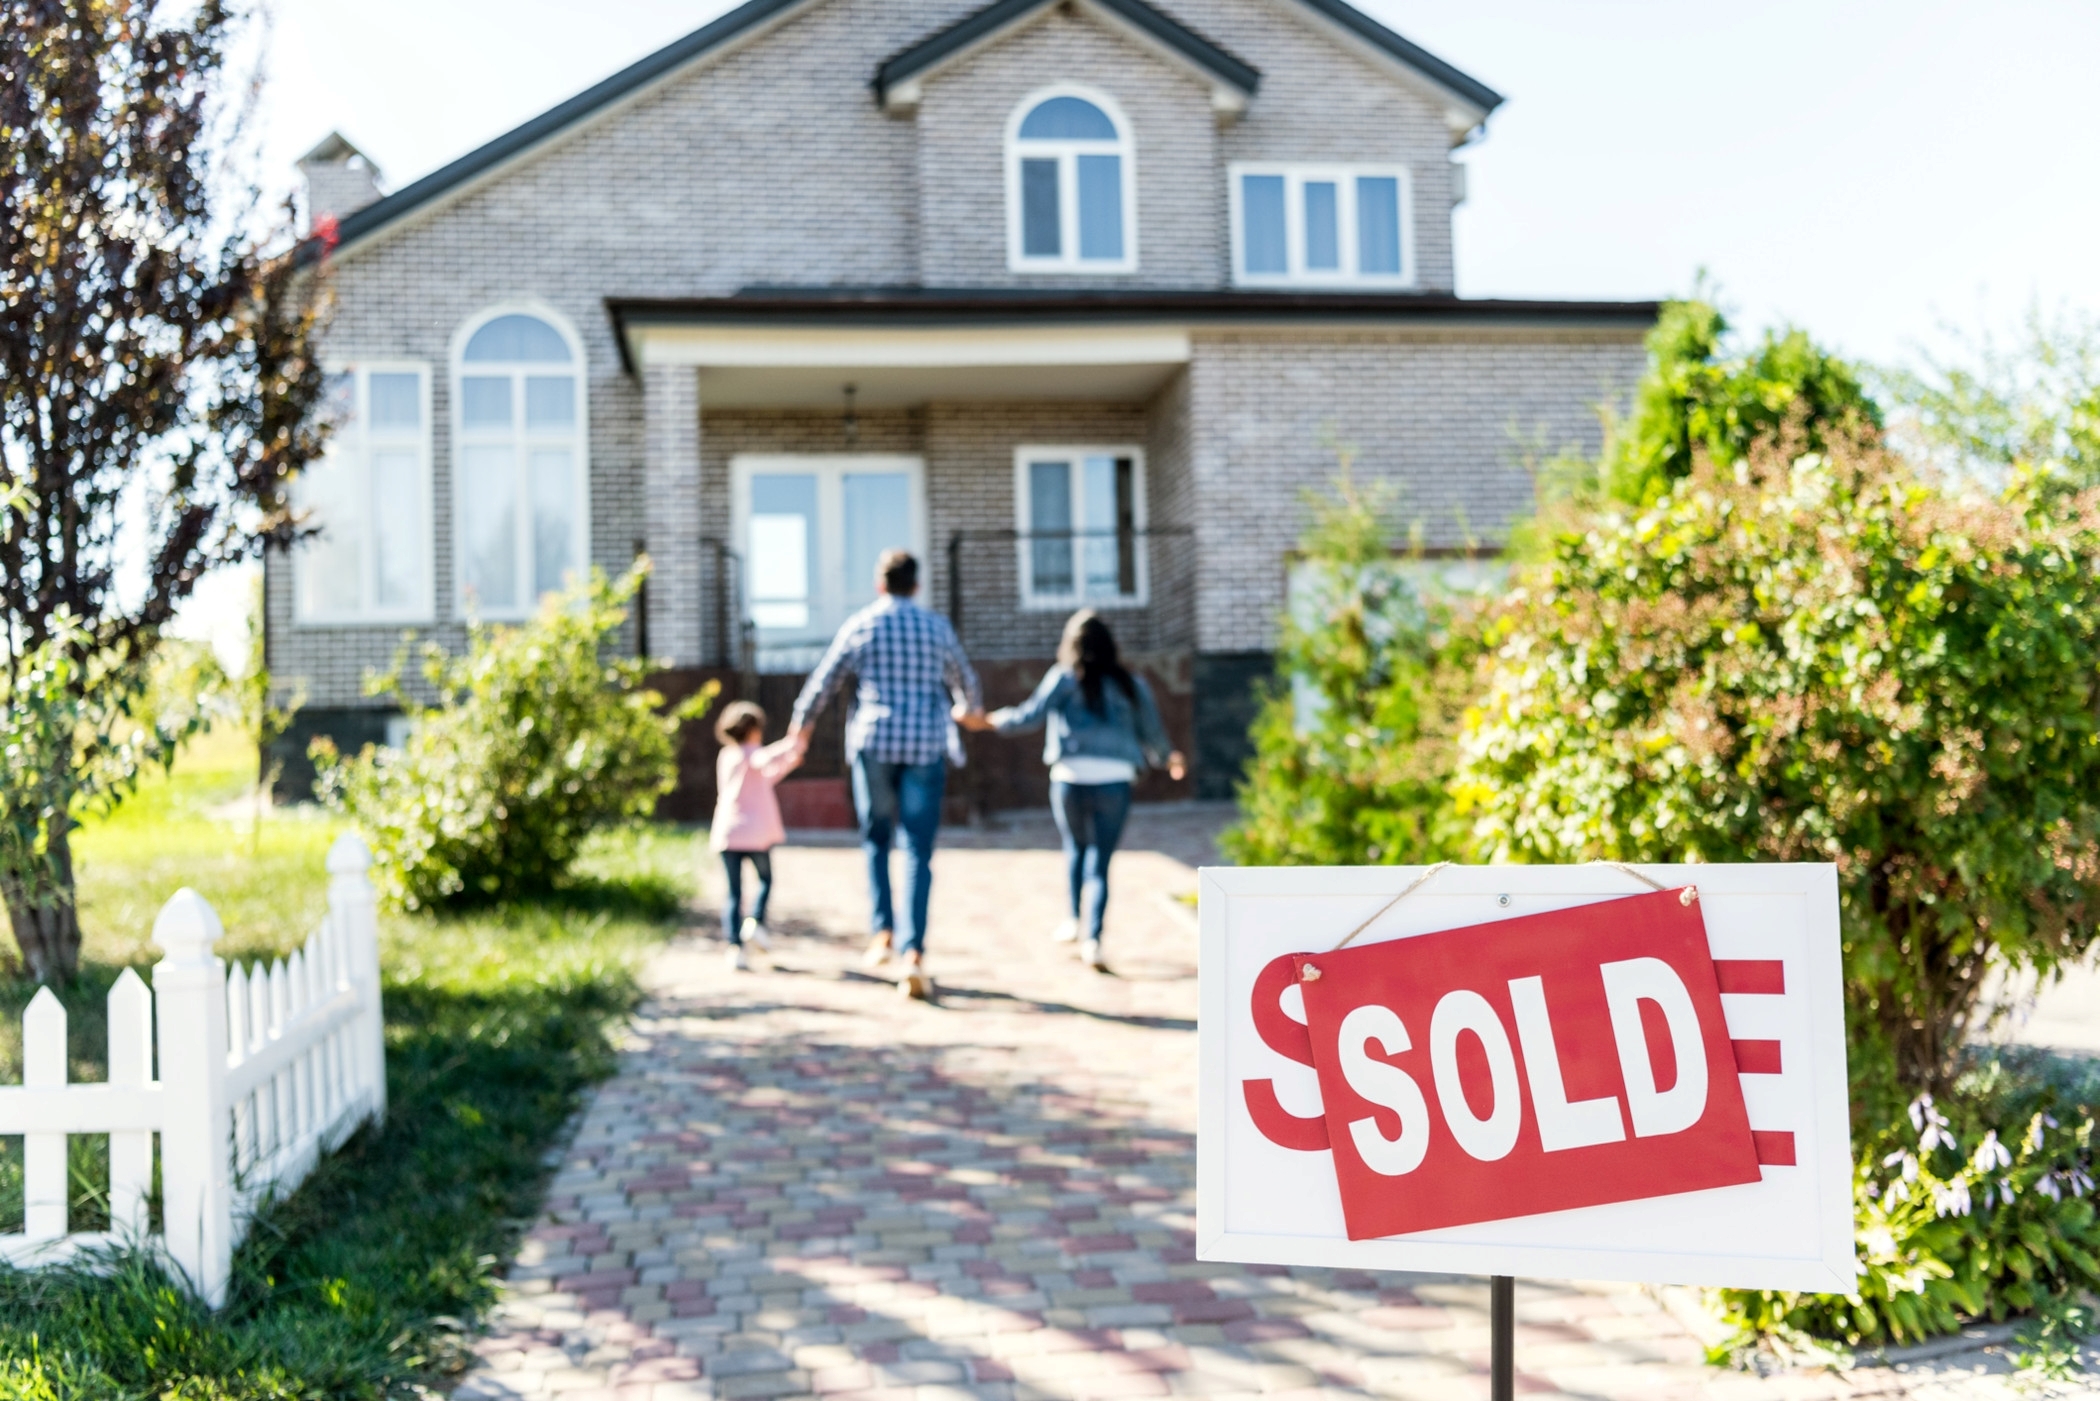 The rate of appreciation slowed in the fourth quarter, though 166 of 186 U.S. metropolitan areas had annual price increases for single-family homes. (Getty Images)